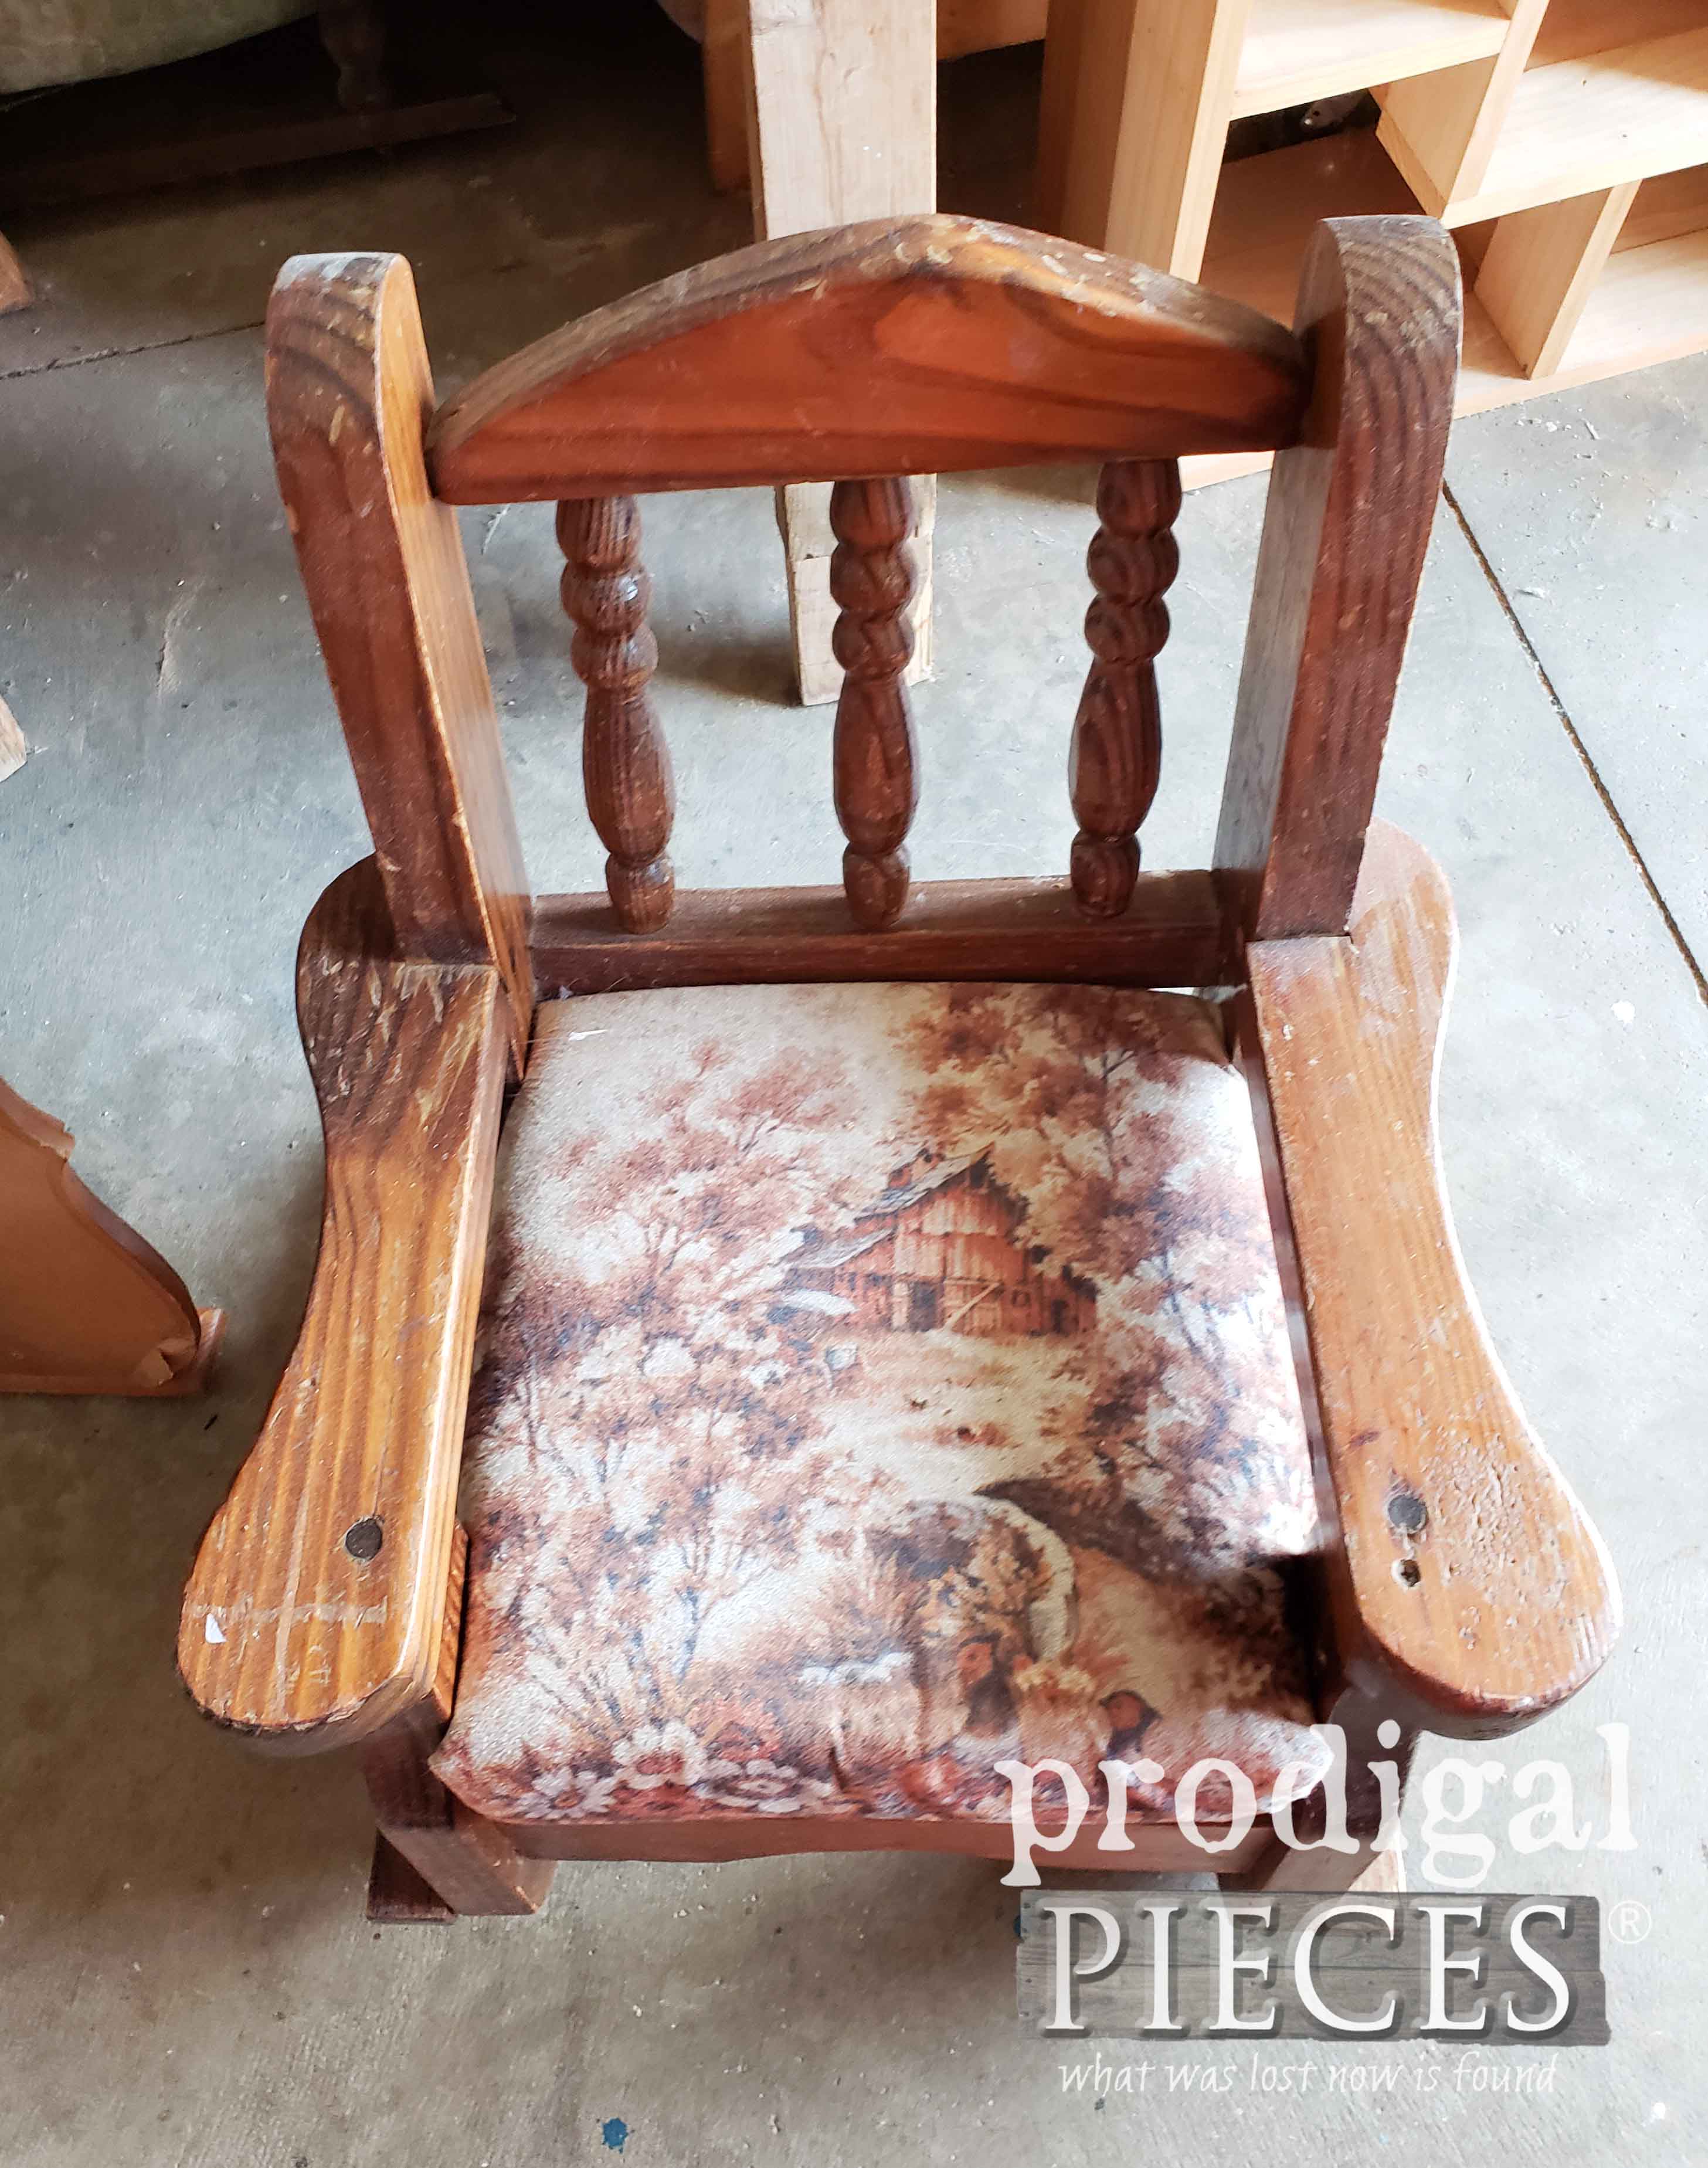 Awful Vintage Upholstery on Child's Rocking Chair | prodigalpieces.com